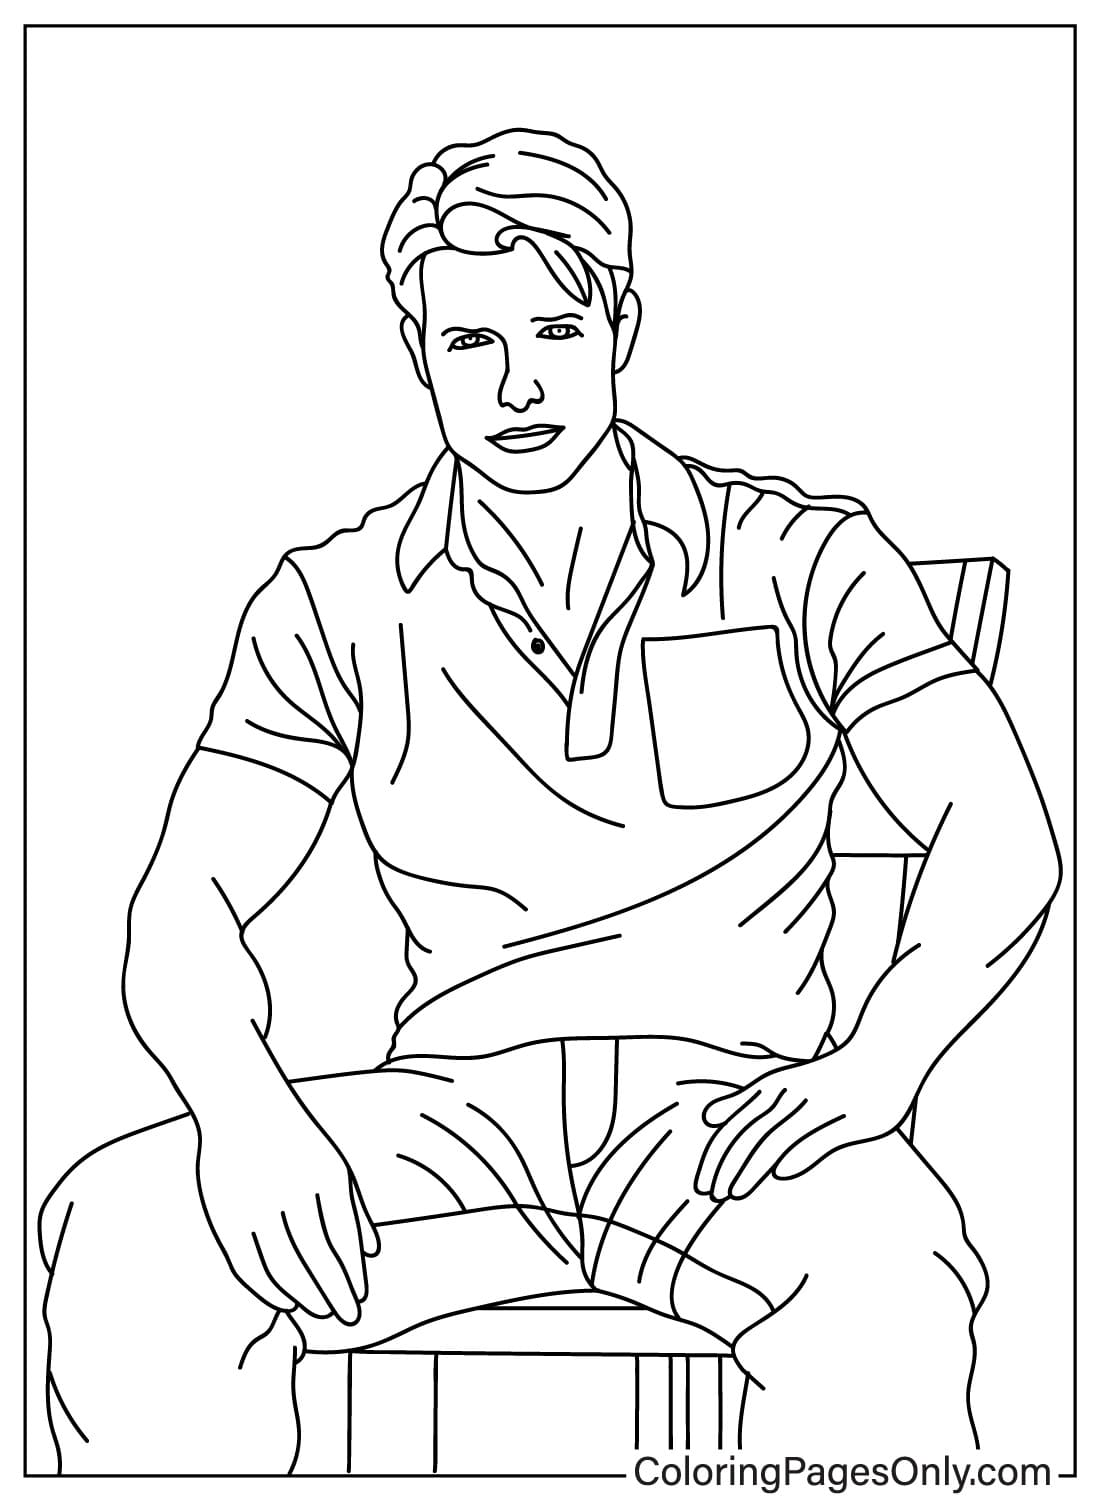 Tom Cruise Coloring Sheet for Kids from Tom Cruise